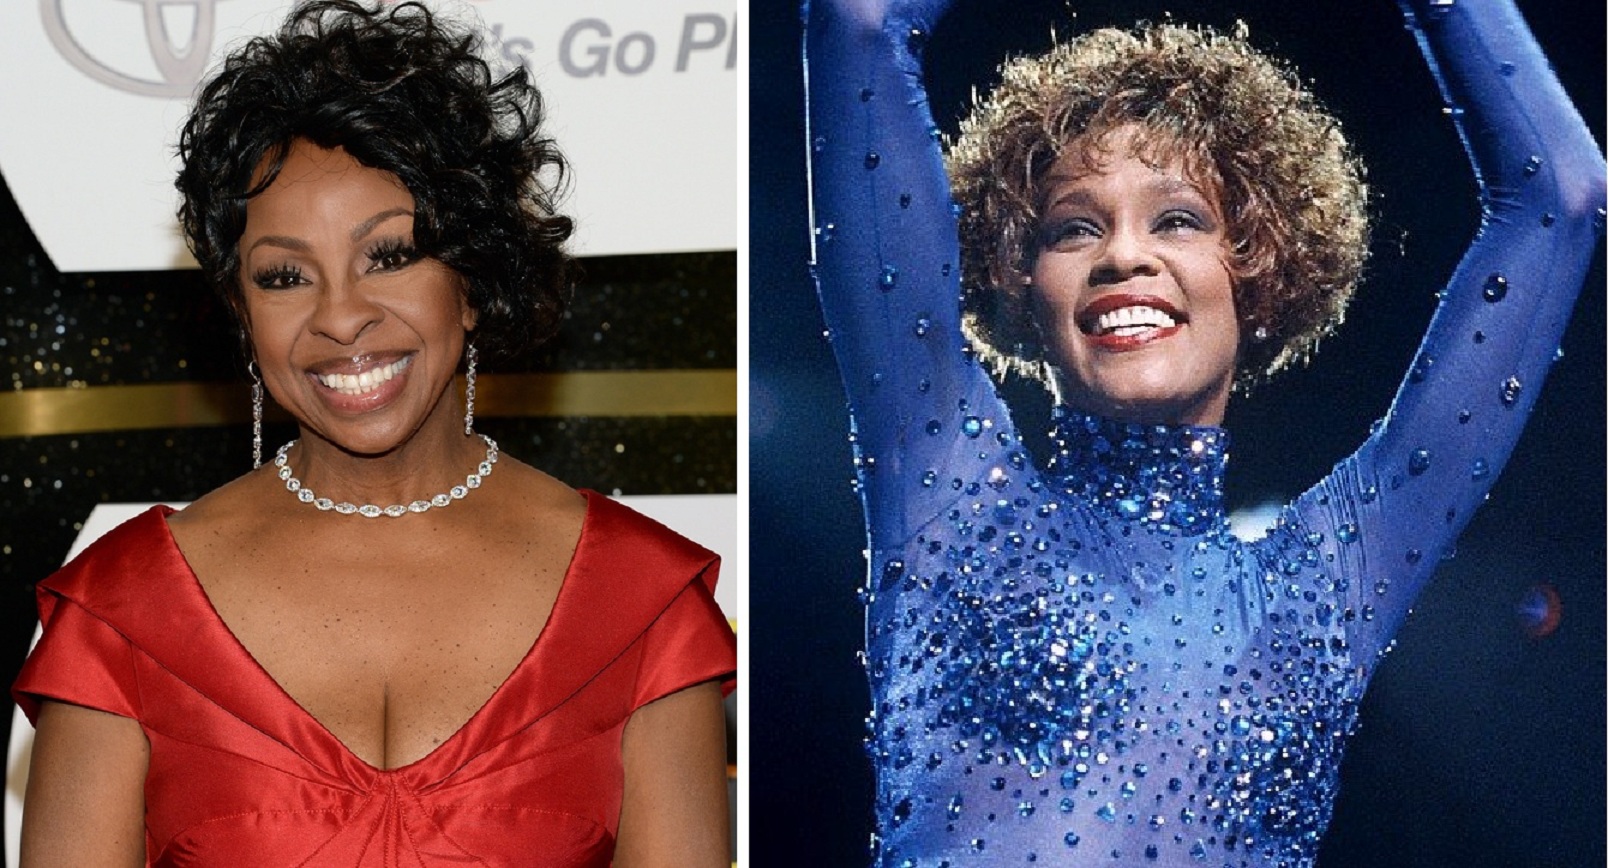 Gladys Knight: “Whitney Houston was so gifted Satan was working her big time”